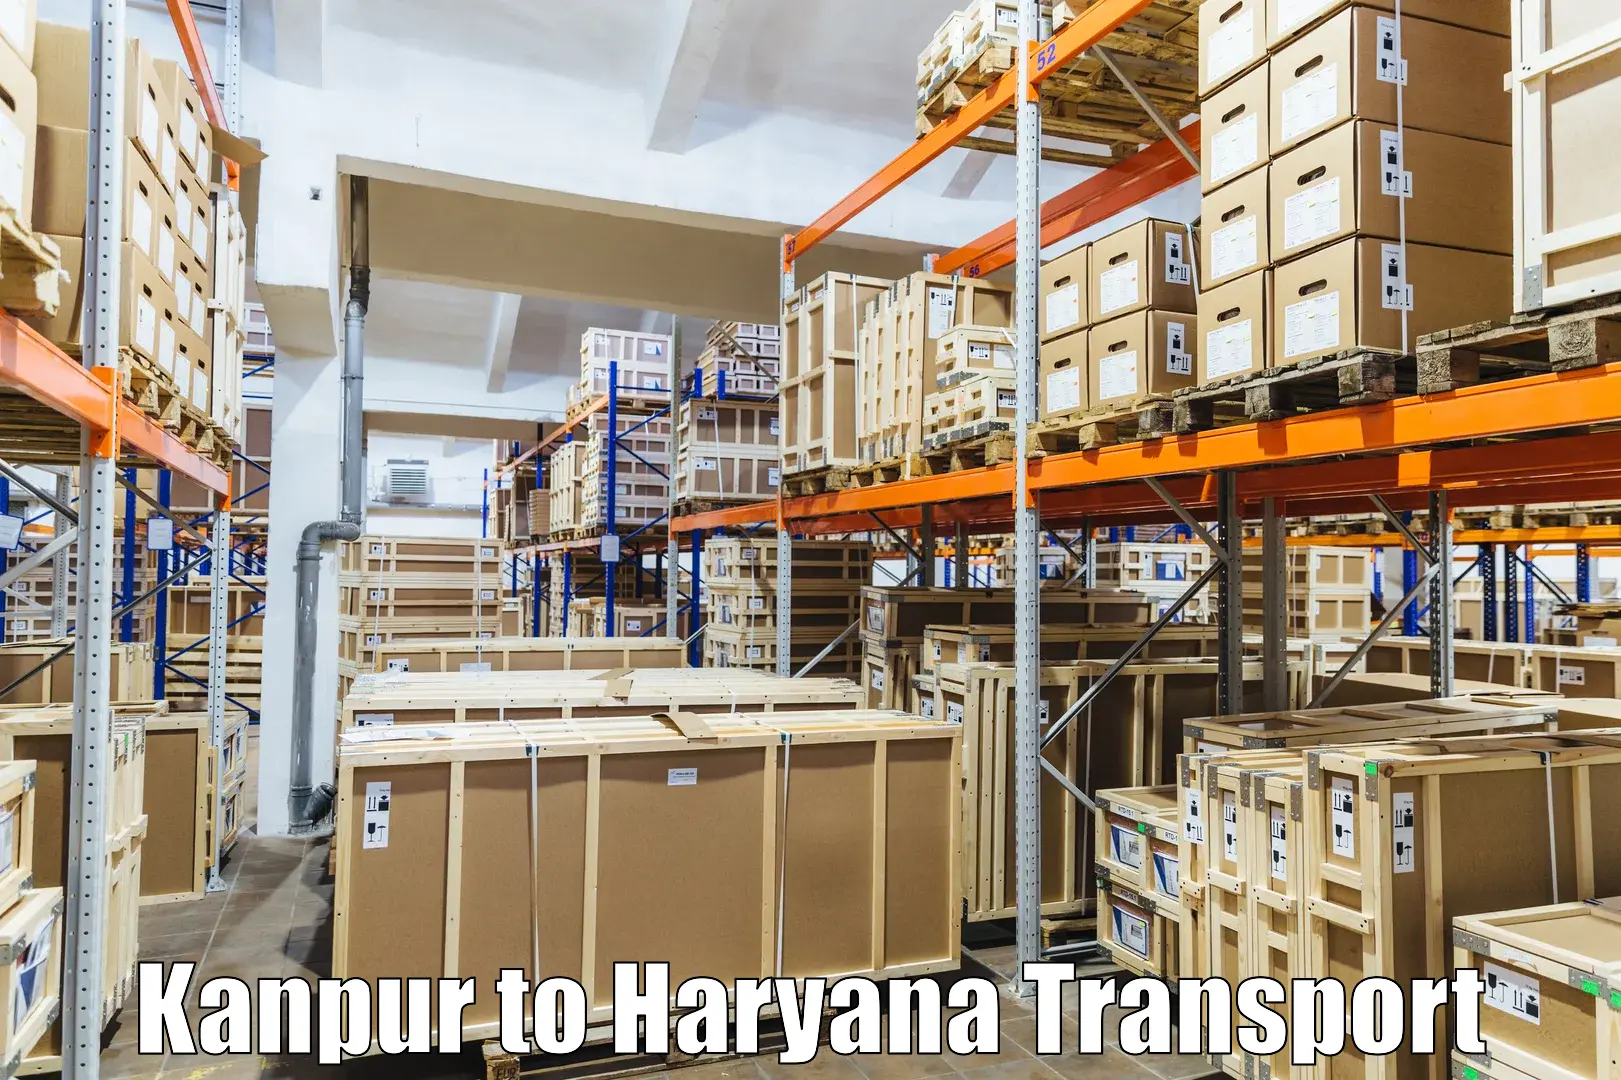 Two wheeler parcel service Kanpur to NCR Haryana